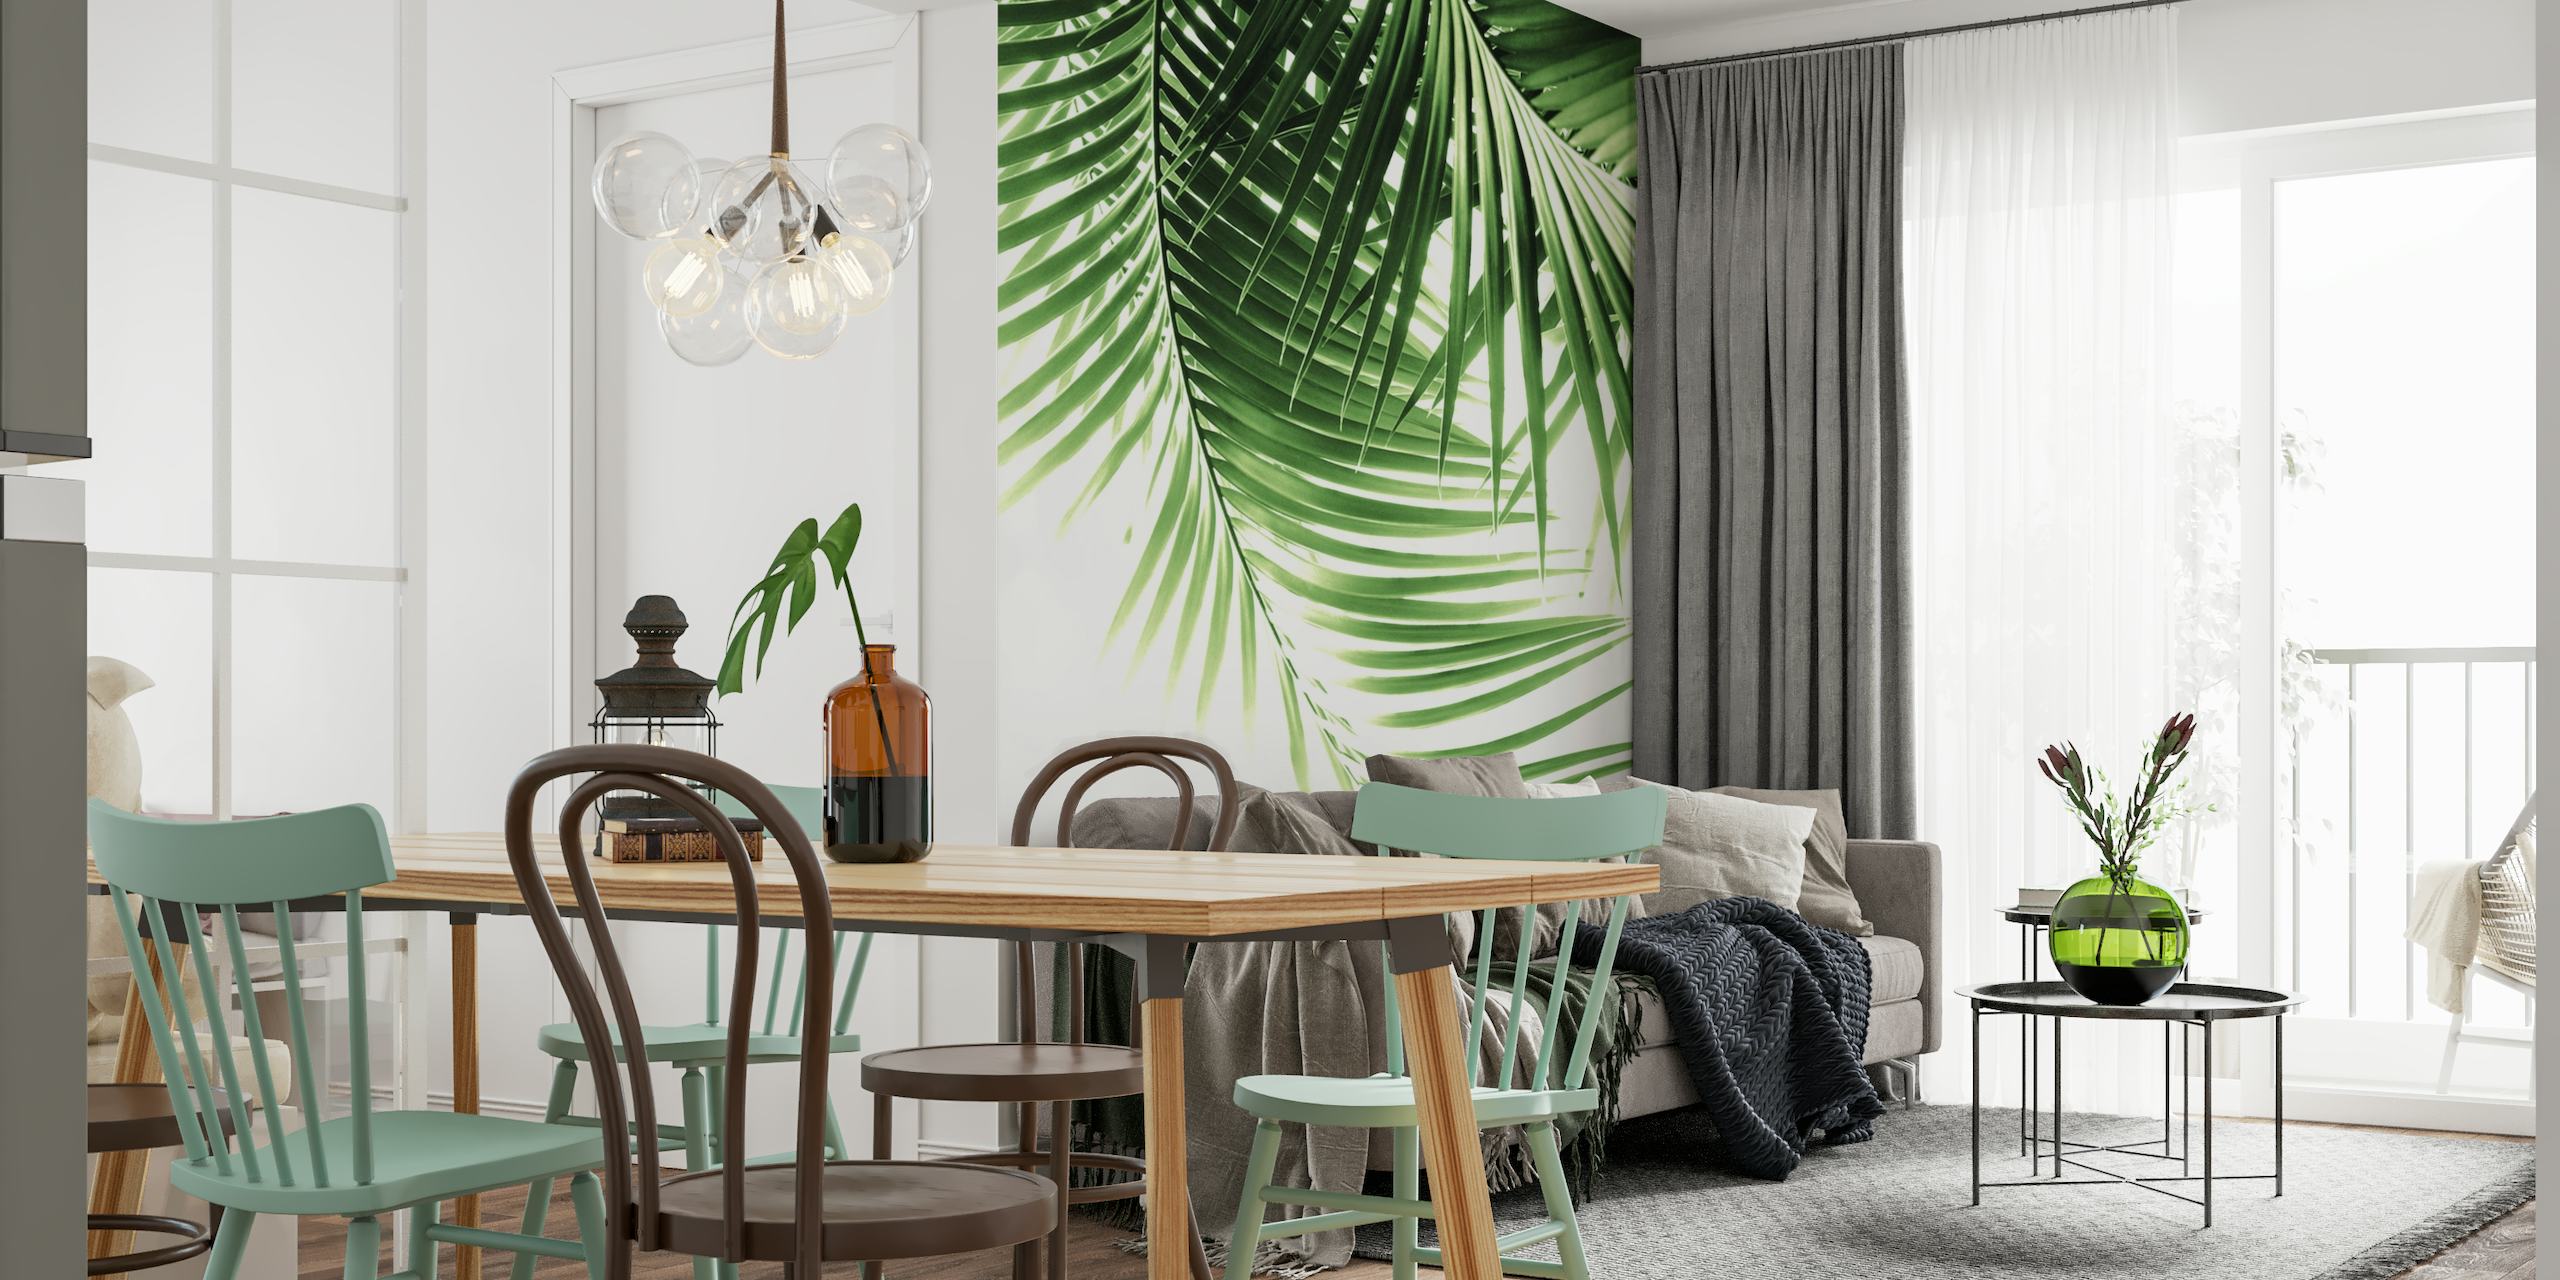 Palm Leaves Green Vibes 9 behang